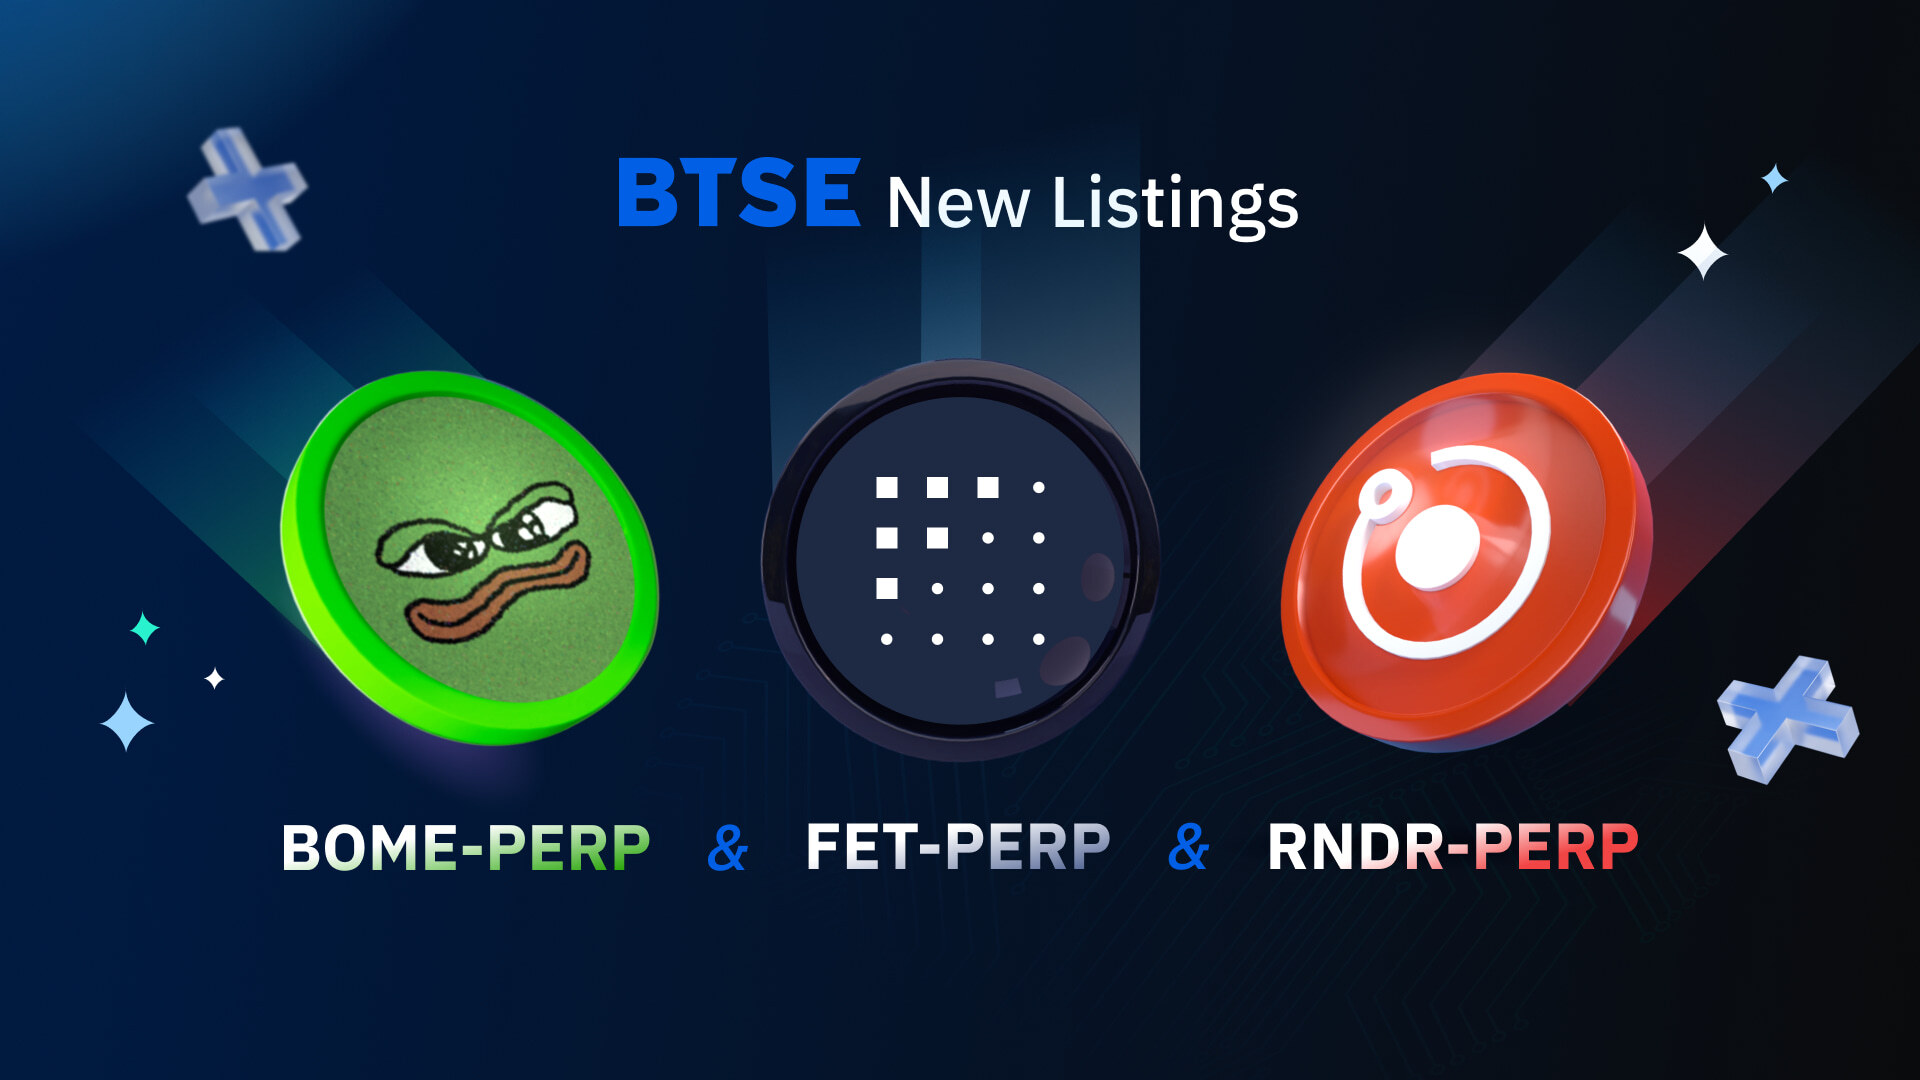 Our aim is to create a platform that offers users the most enjoyable trading experience. If you have any feedback, please reach out to us at feedback@btse.com or on X @BTSE_Official. Note: BTSE Blog contents are intended solely to provide varying insights and perspectives. Unless otherwise noted, they do not represent the views of BTSE and should in no way be treated as investment advice. Markets are volatile, and trading brings rewards and risks. Trade with caution.